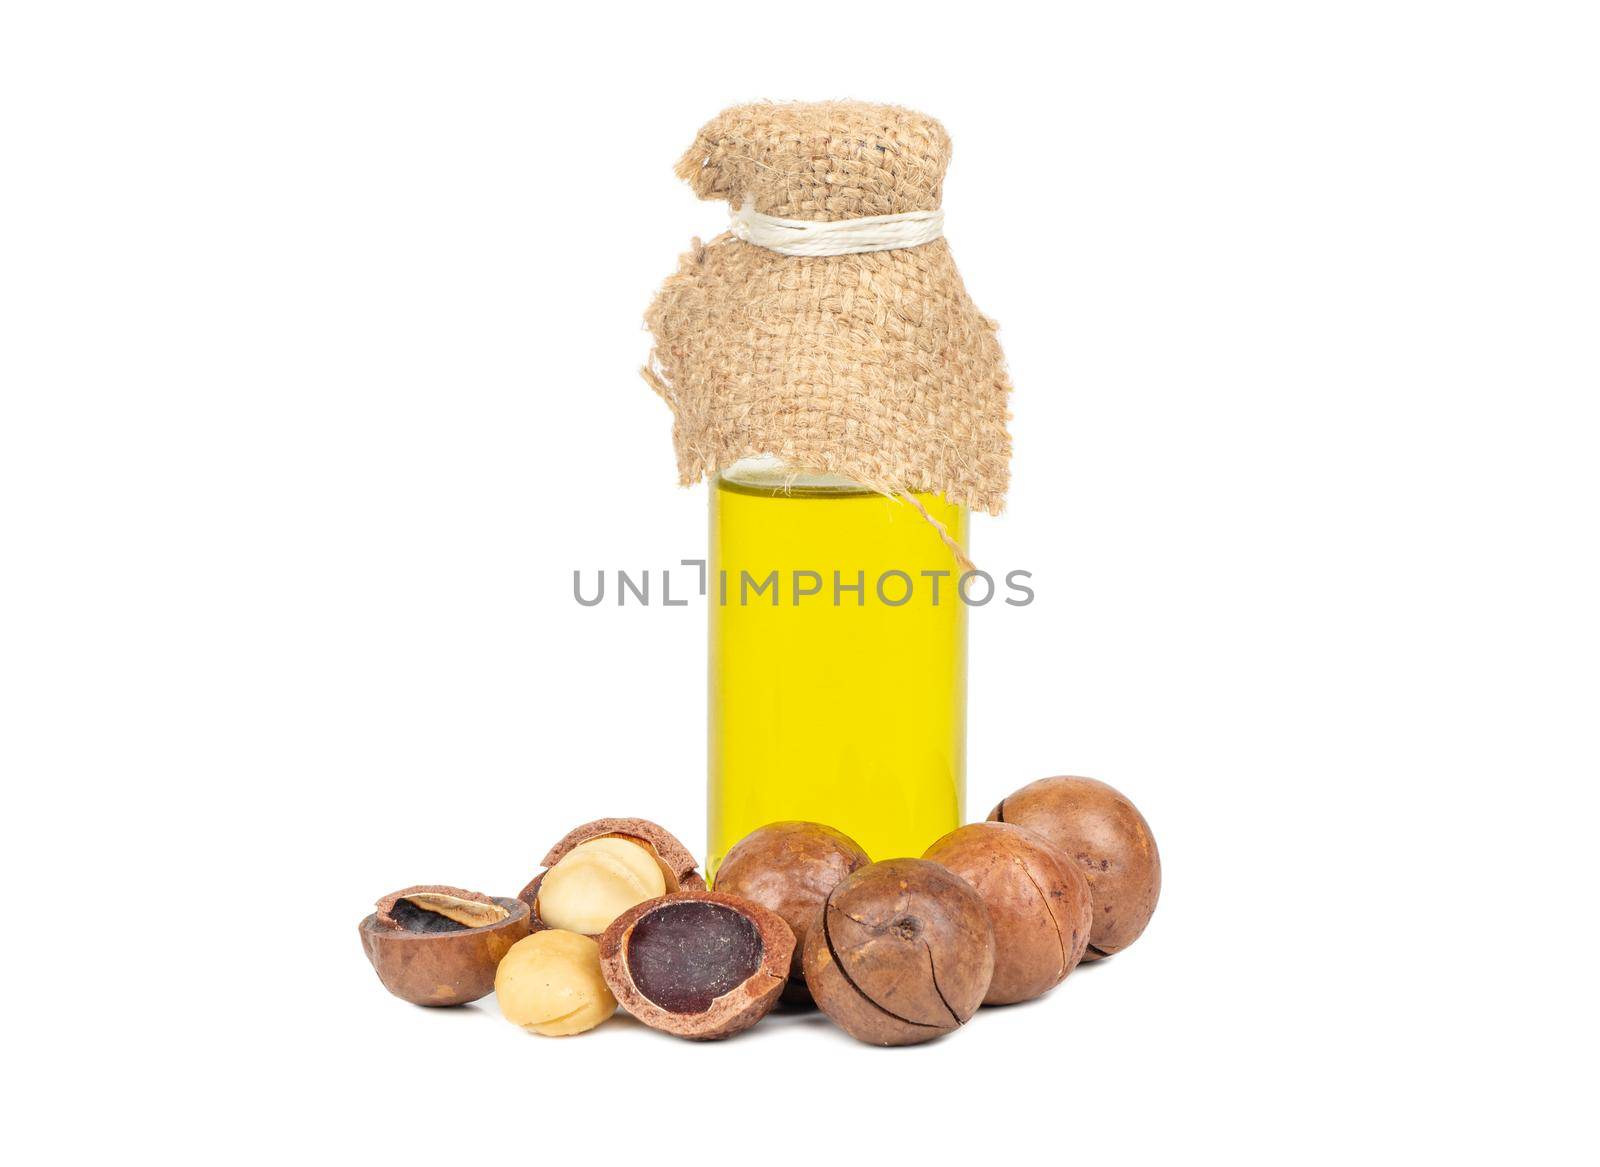 Macadamia nuts with oil in a bottle on a white background